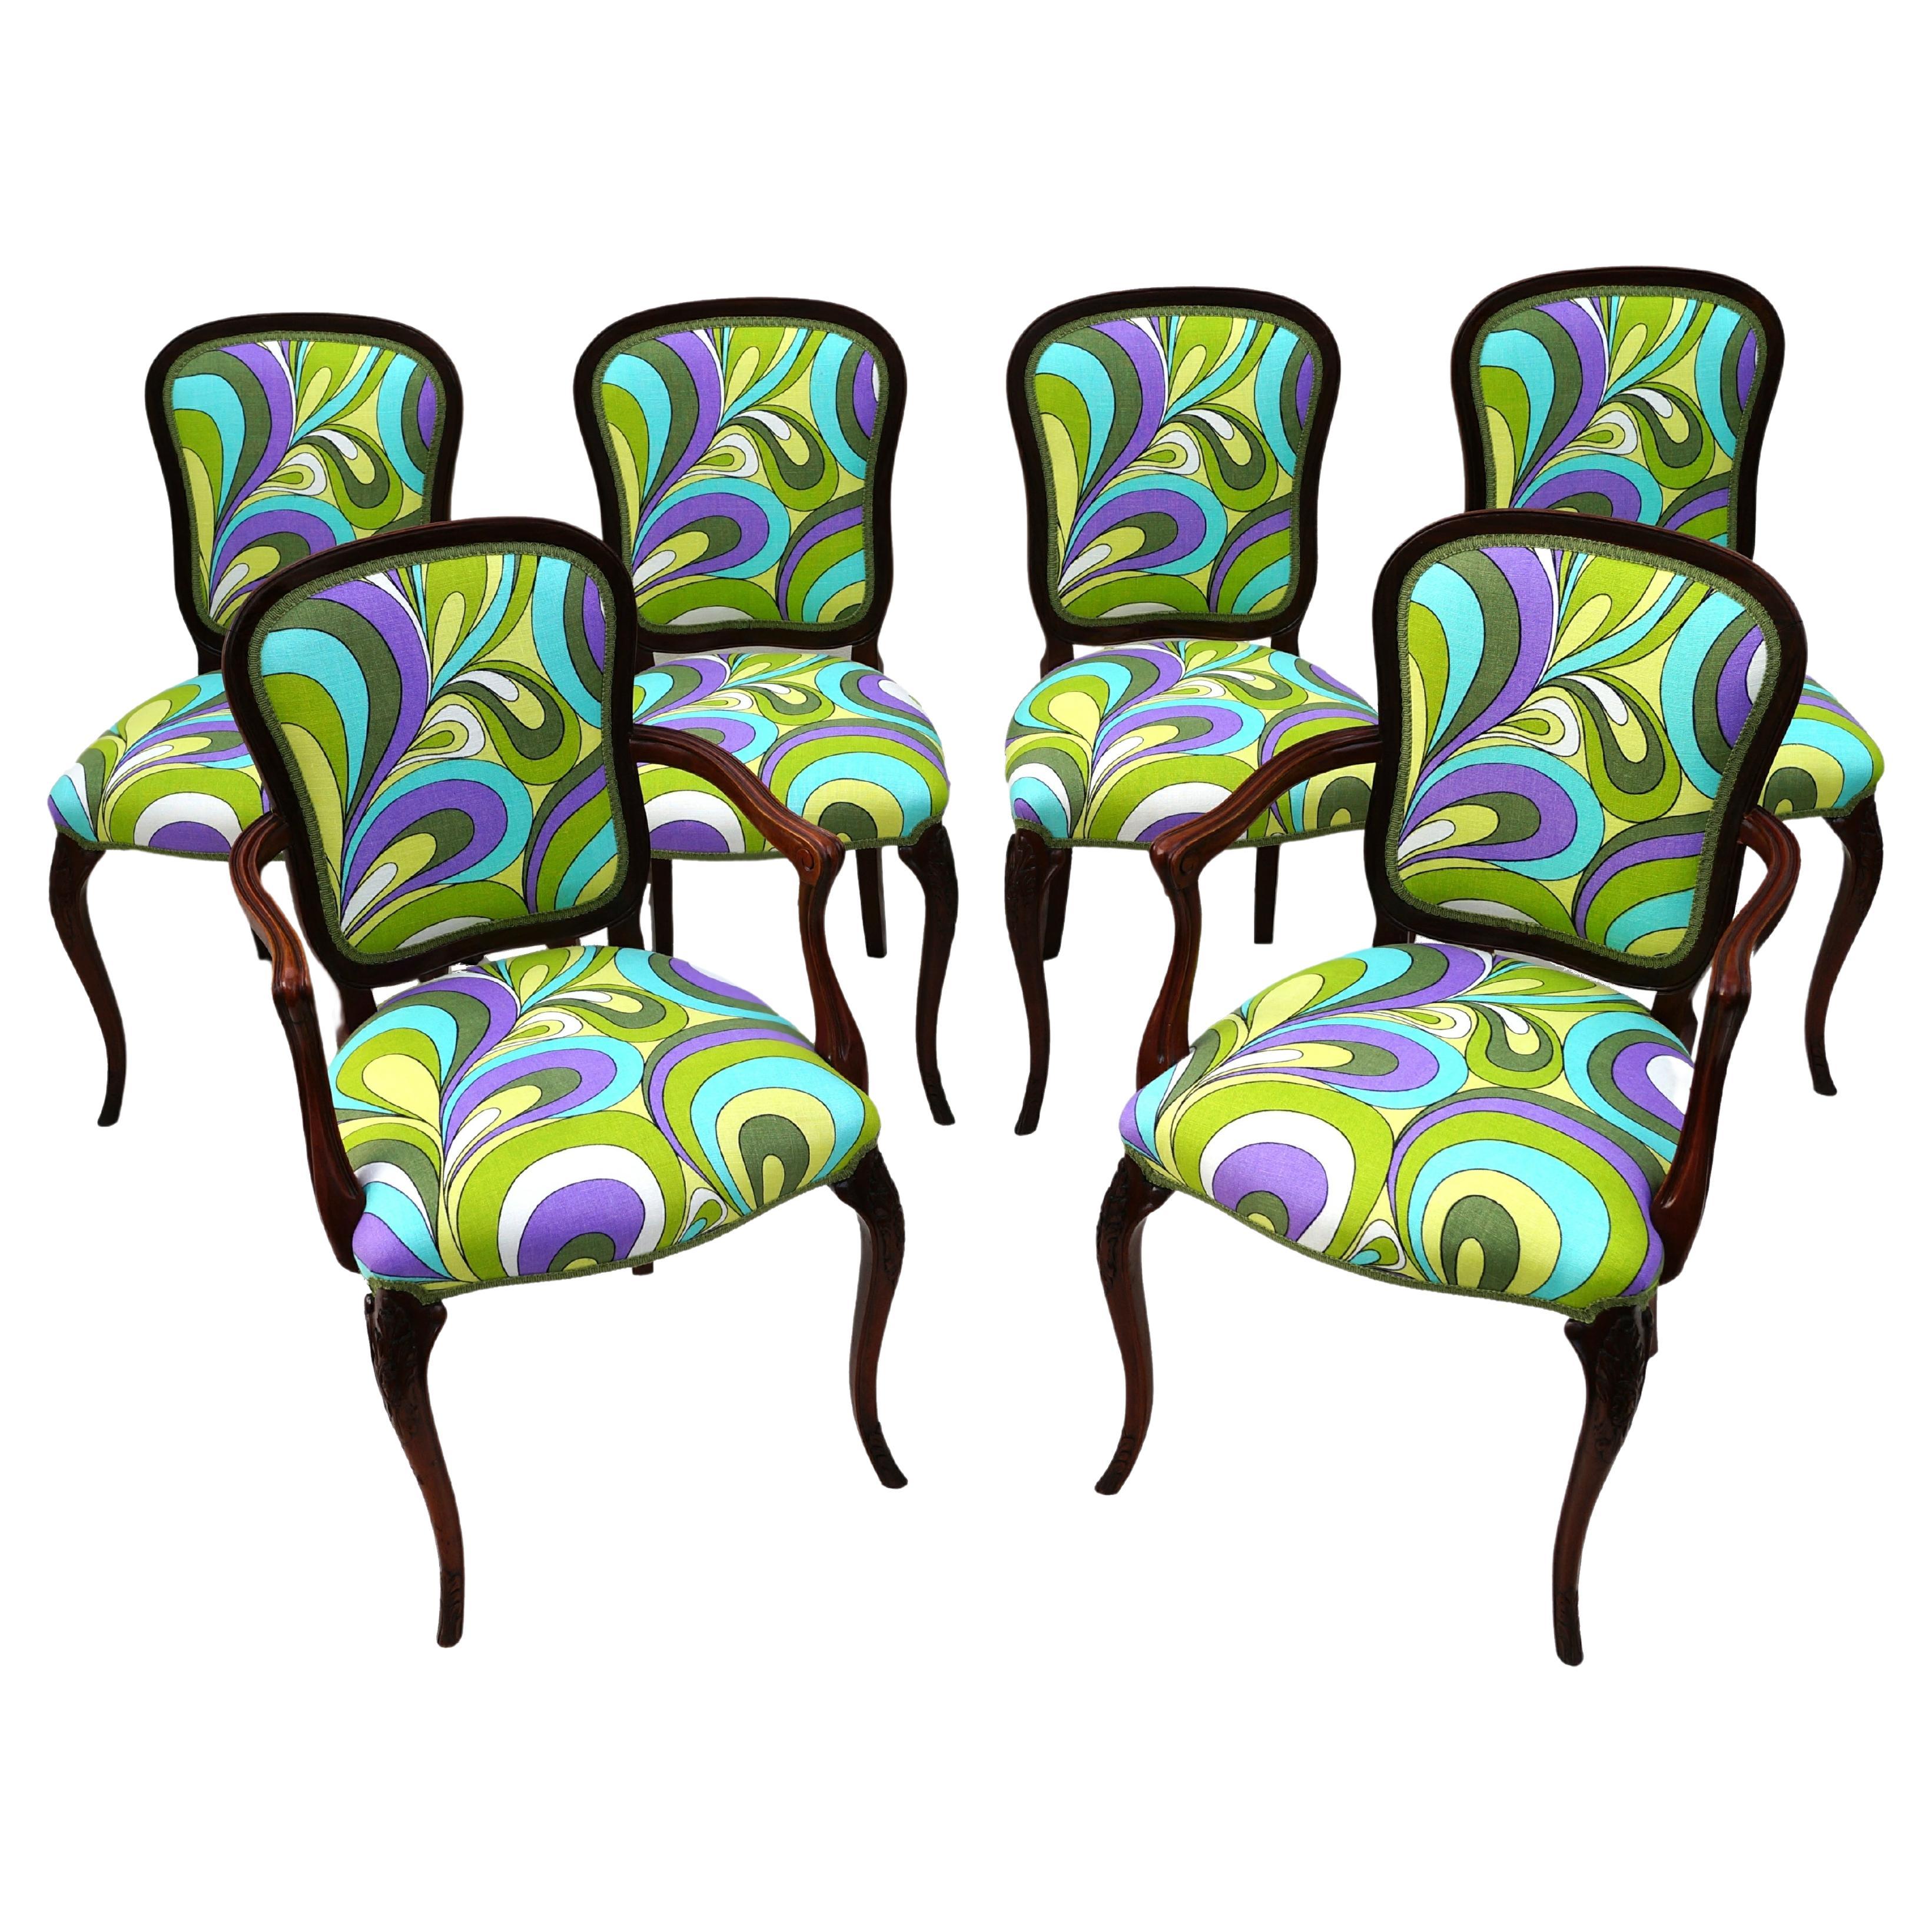 Set 6 Unusual French Provincial Hollywood Regency Pucci Style Dining Room Chairs